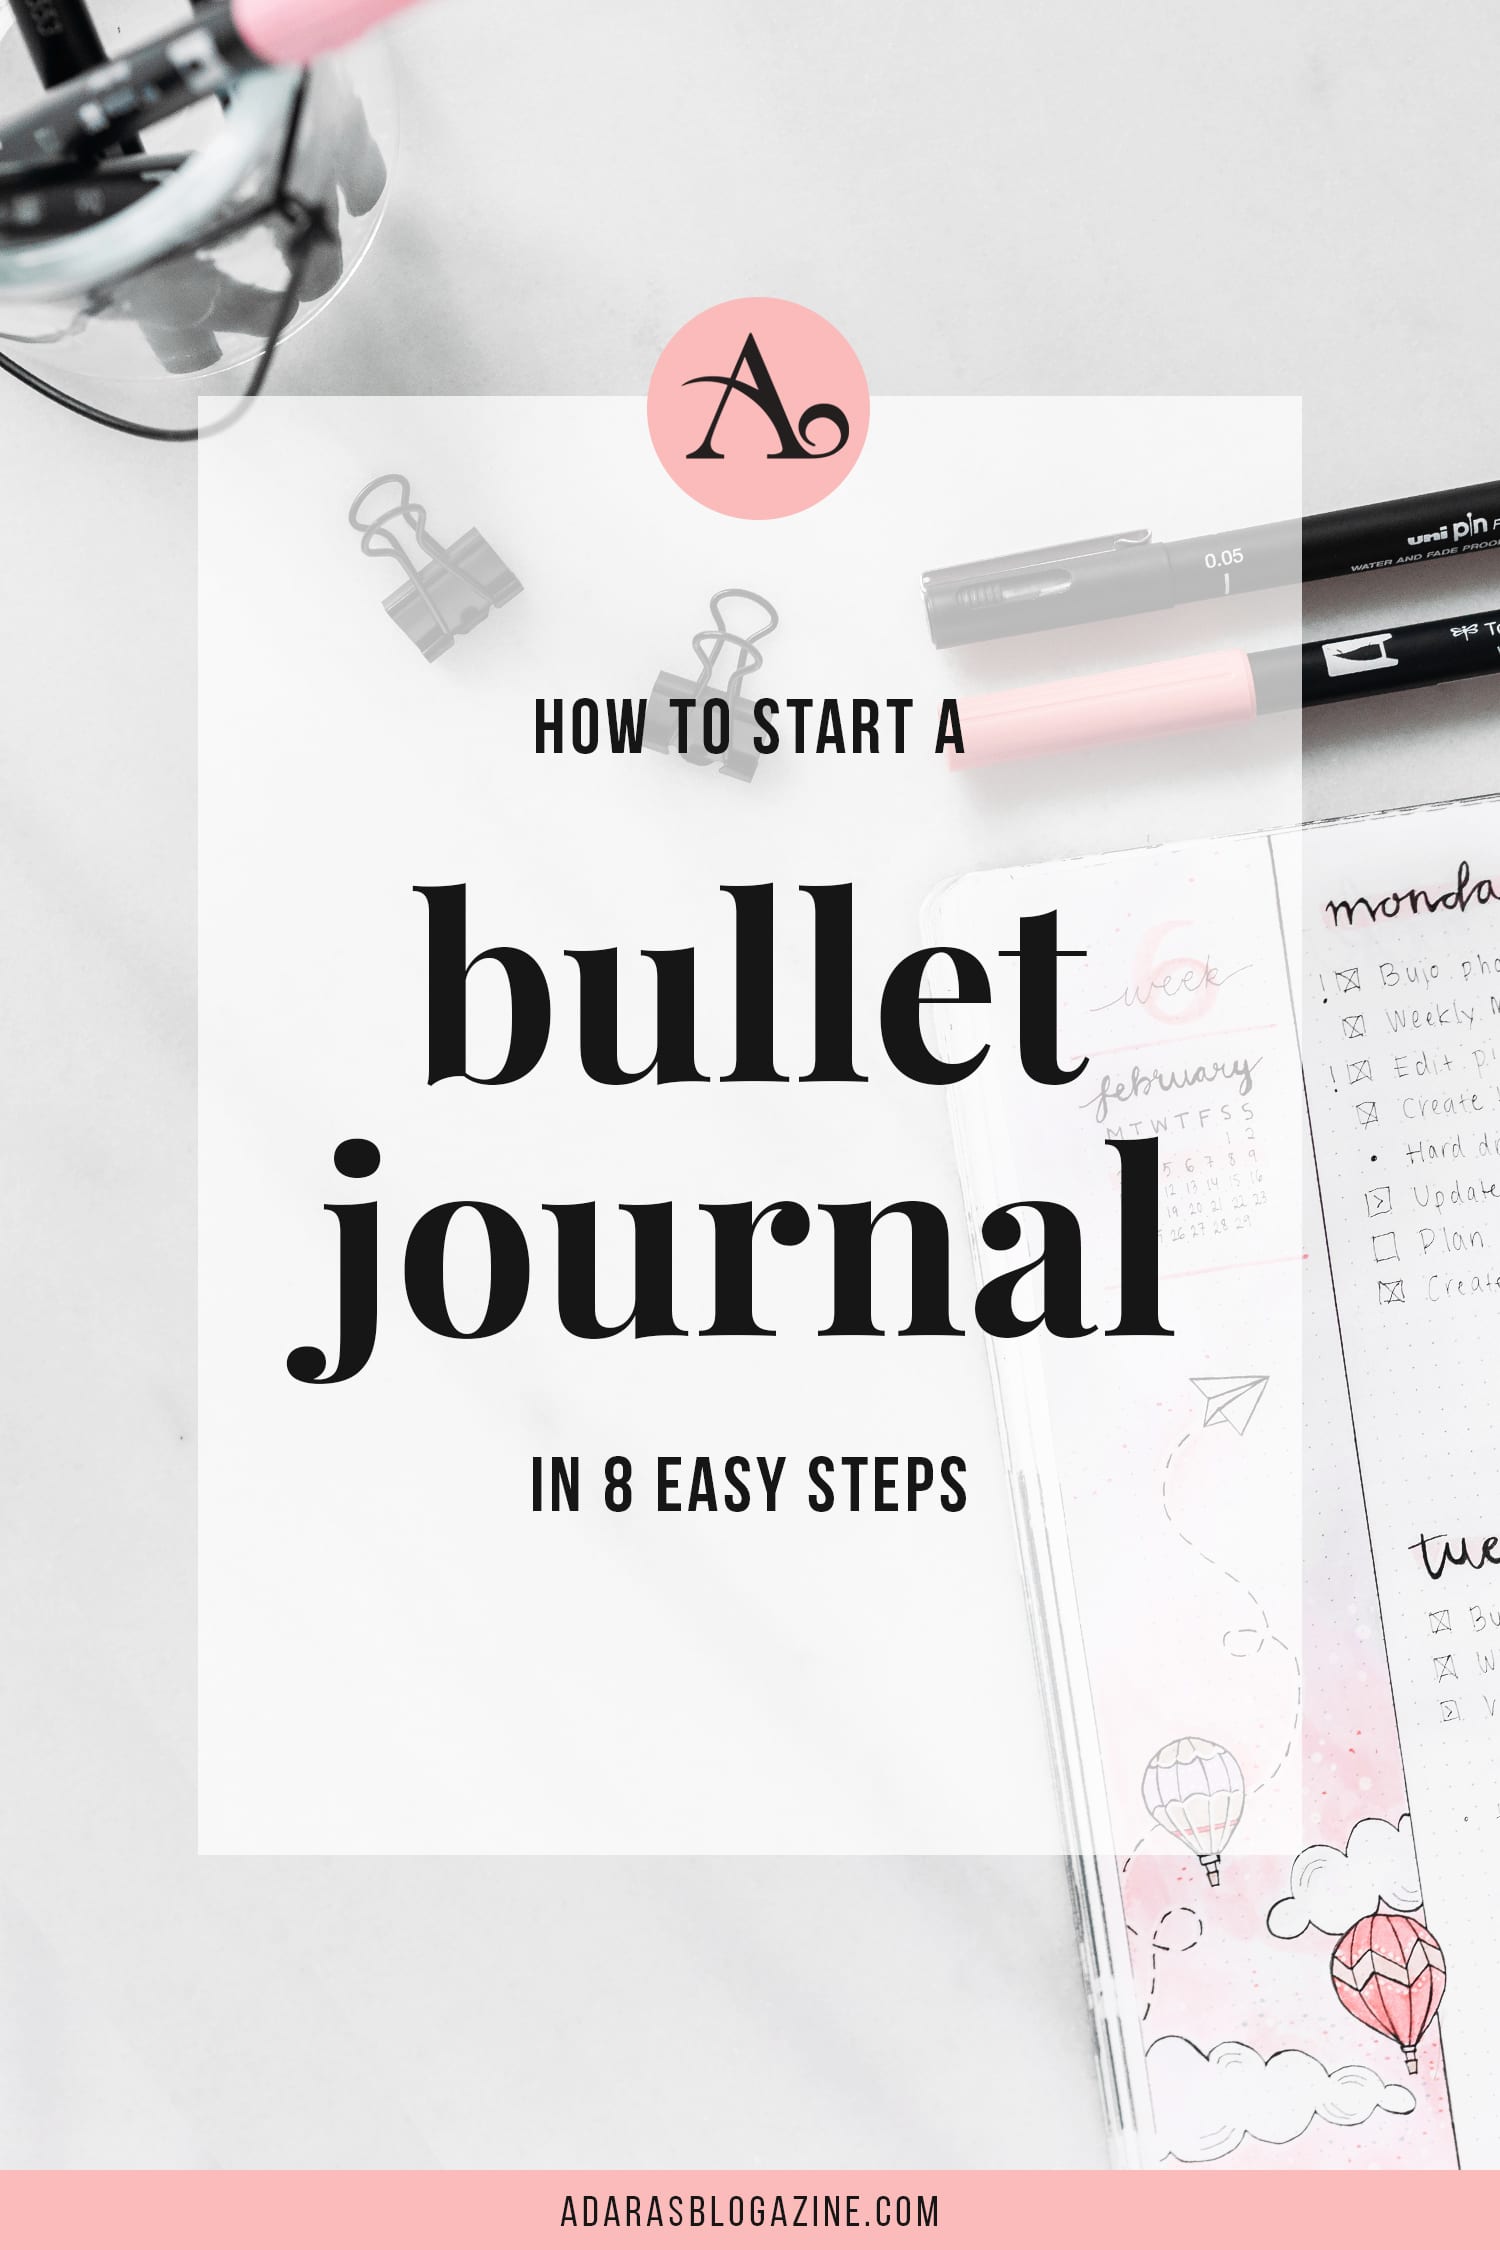 How to Start a Bullet Journal - The Complete Guide for Beginners & Beyond